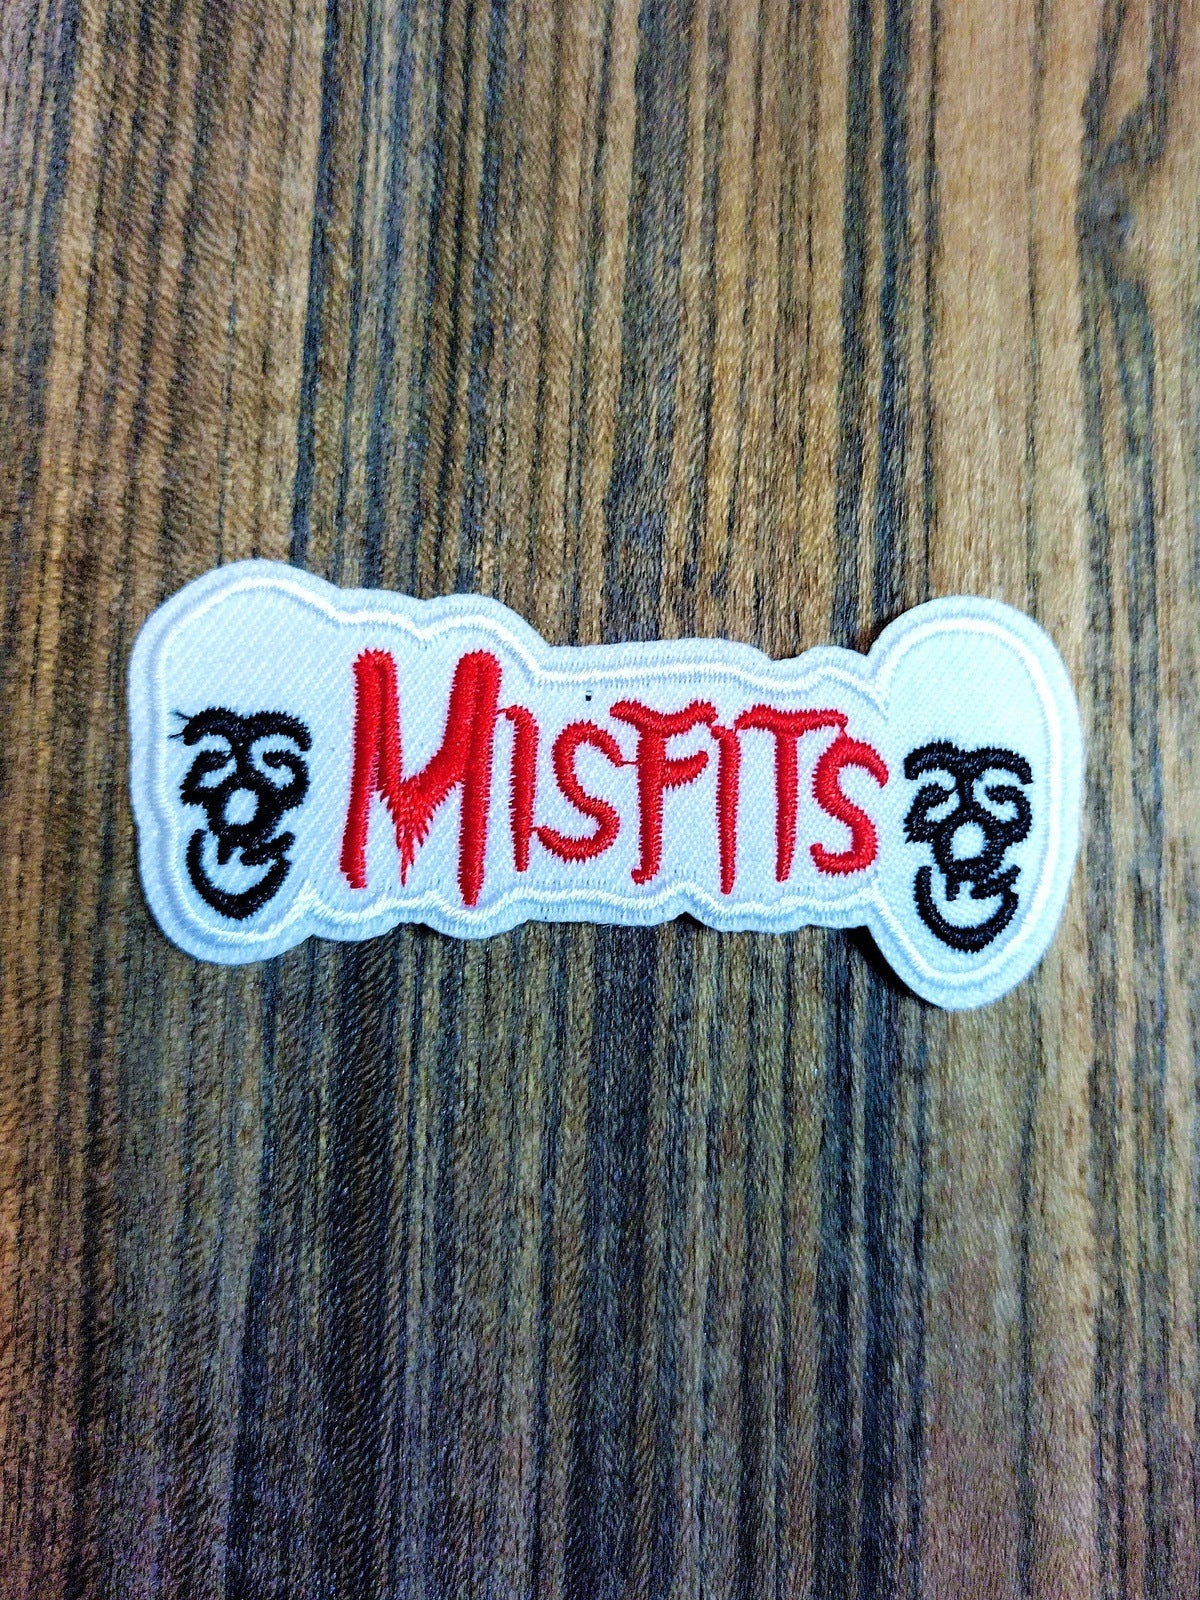 Misfits Patch approx. 3 inches